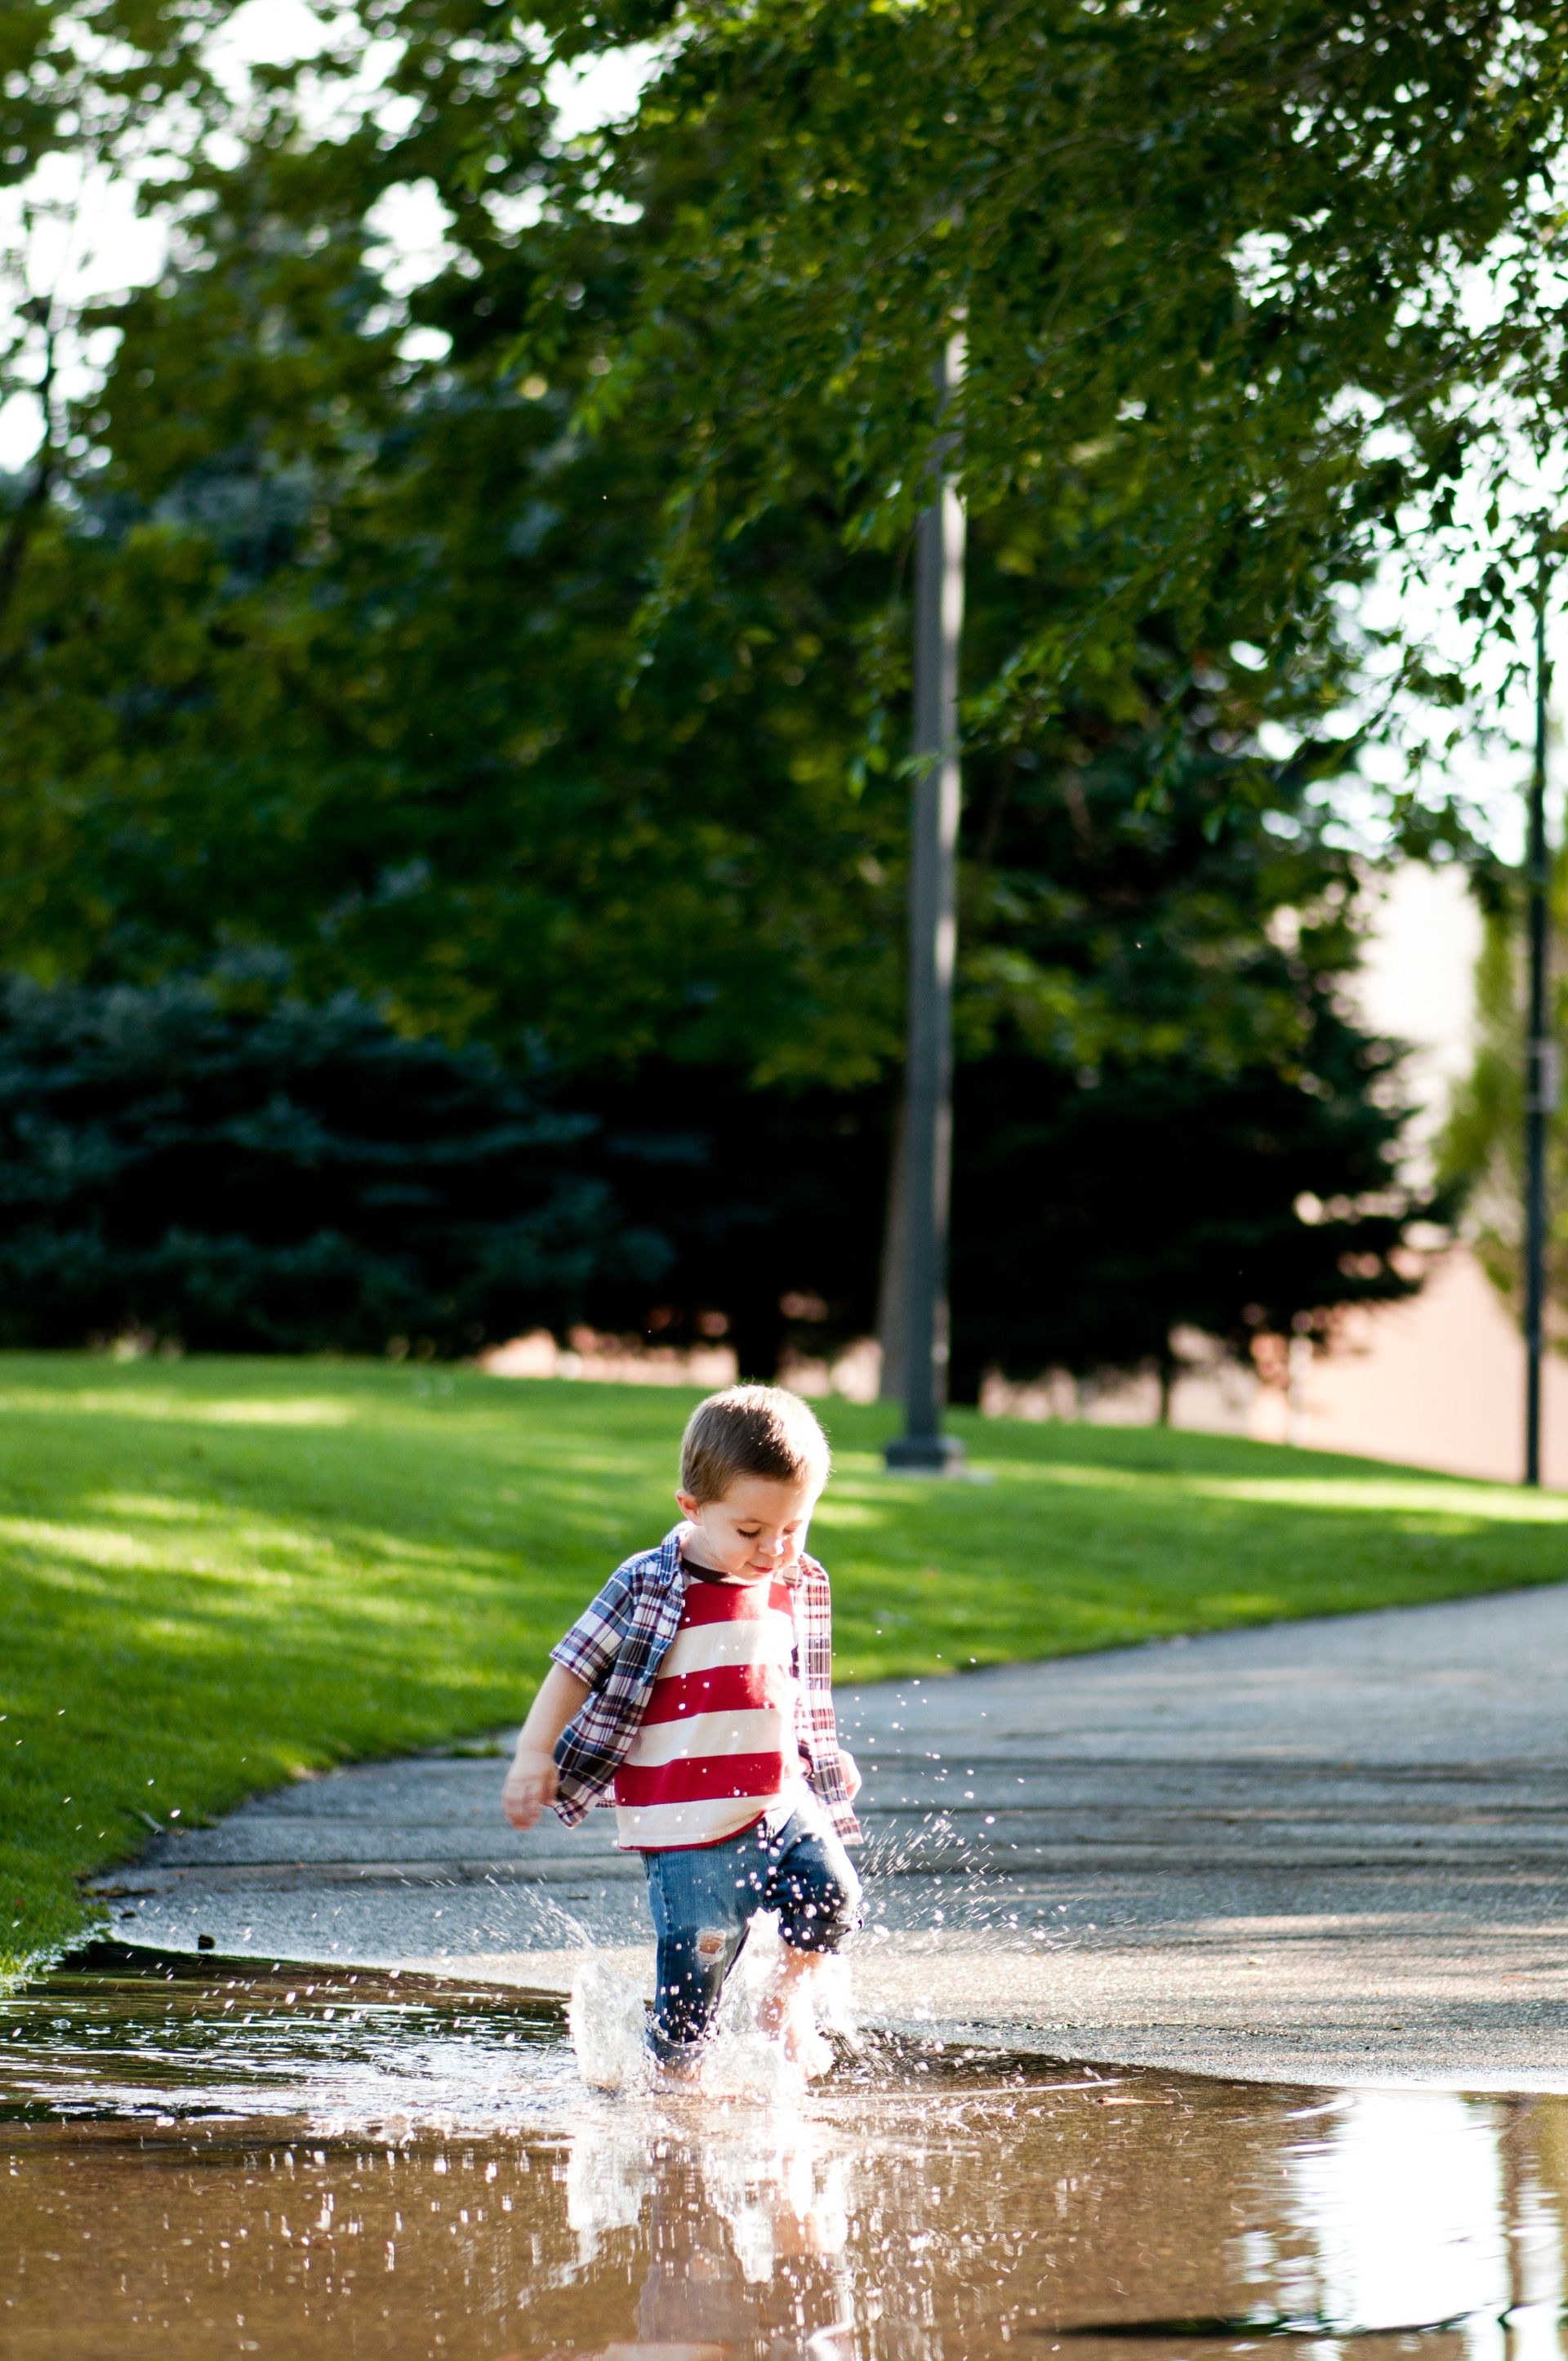 A little boy splashes in the water.